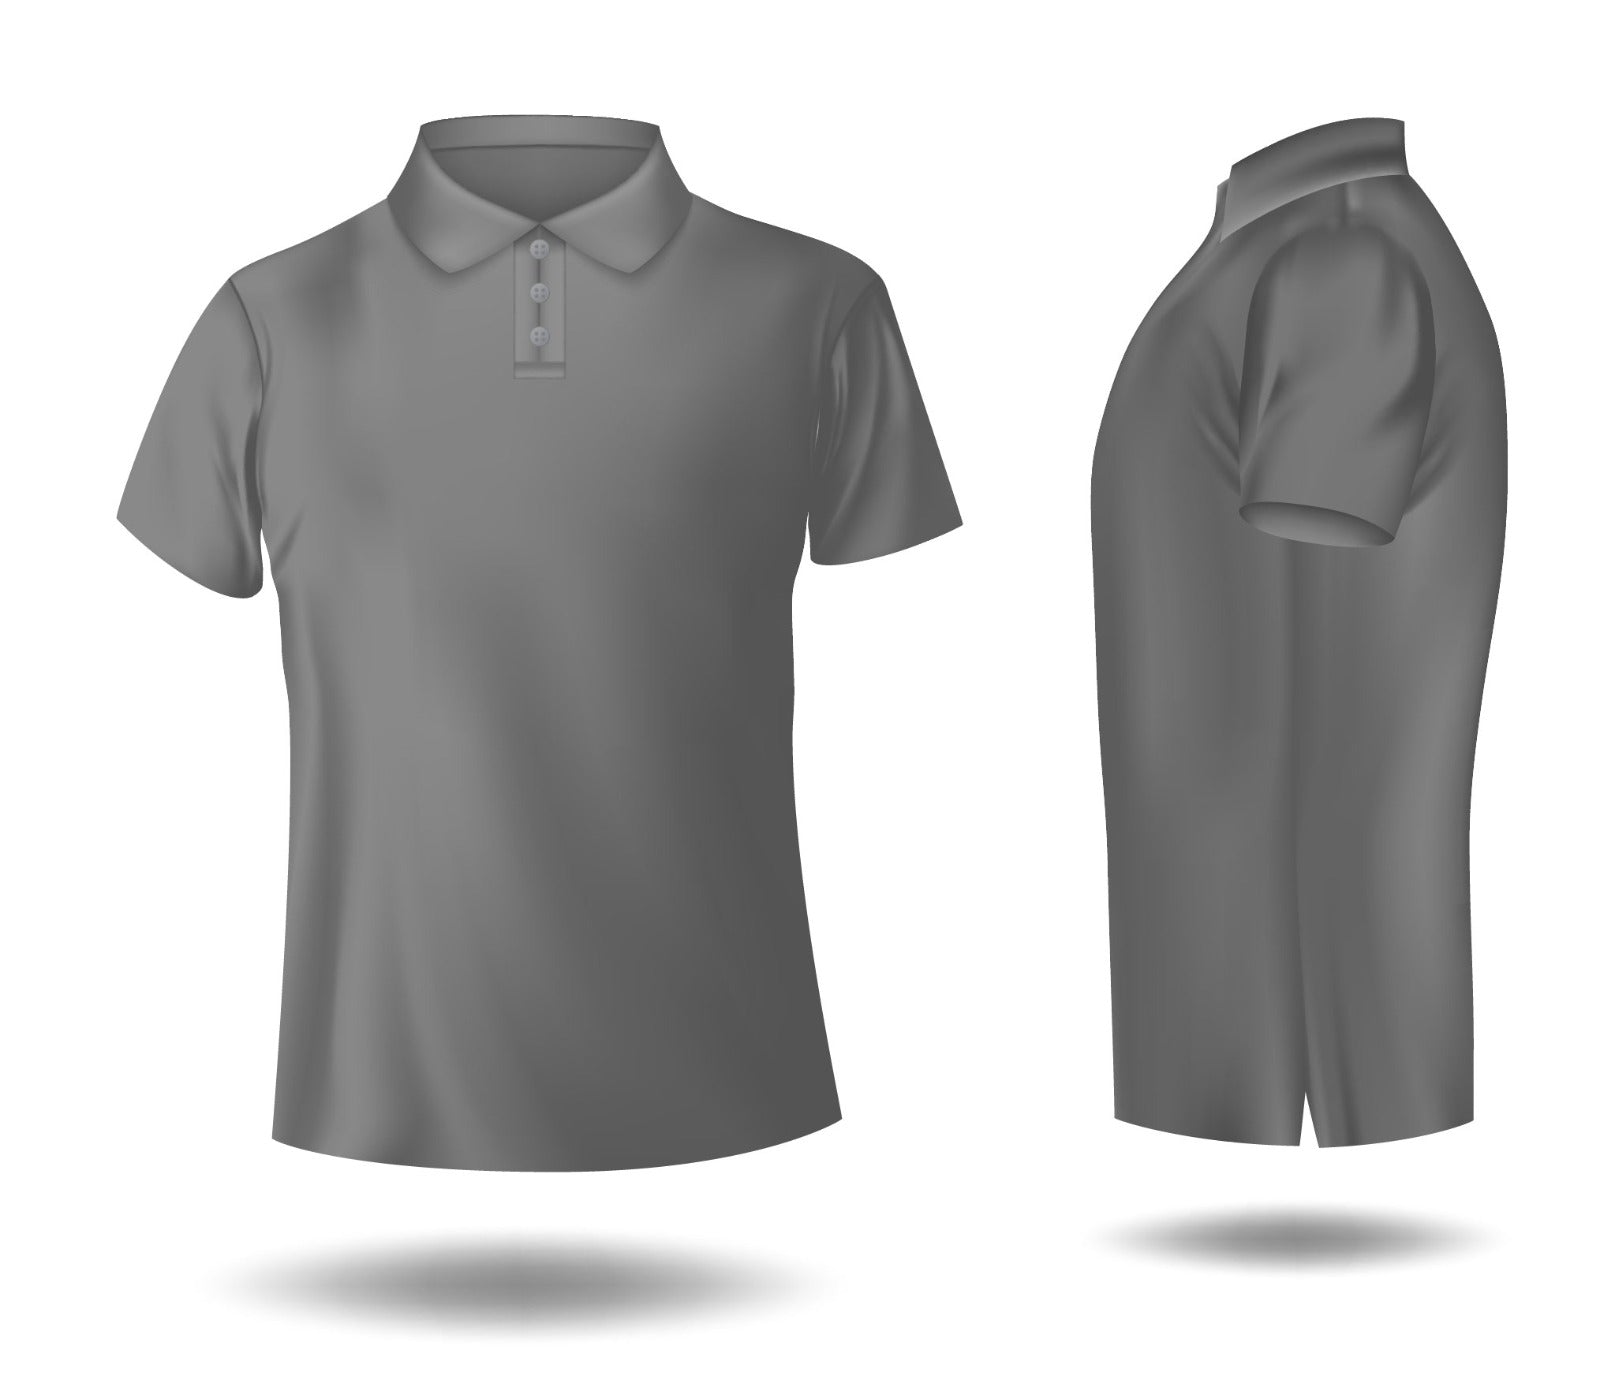  grey polo shirt for men and women